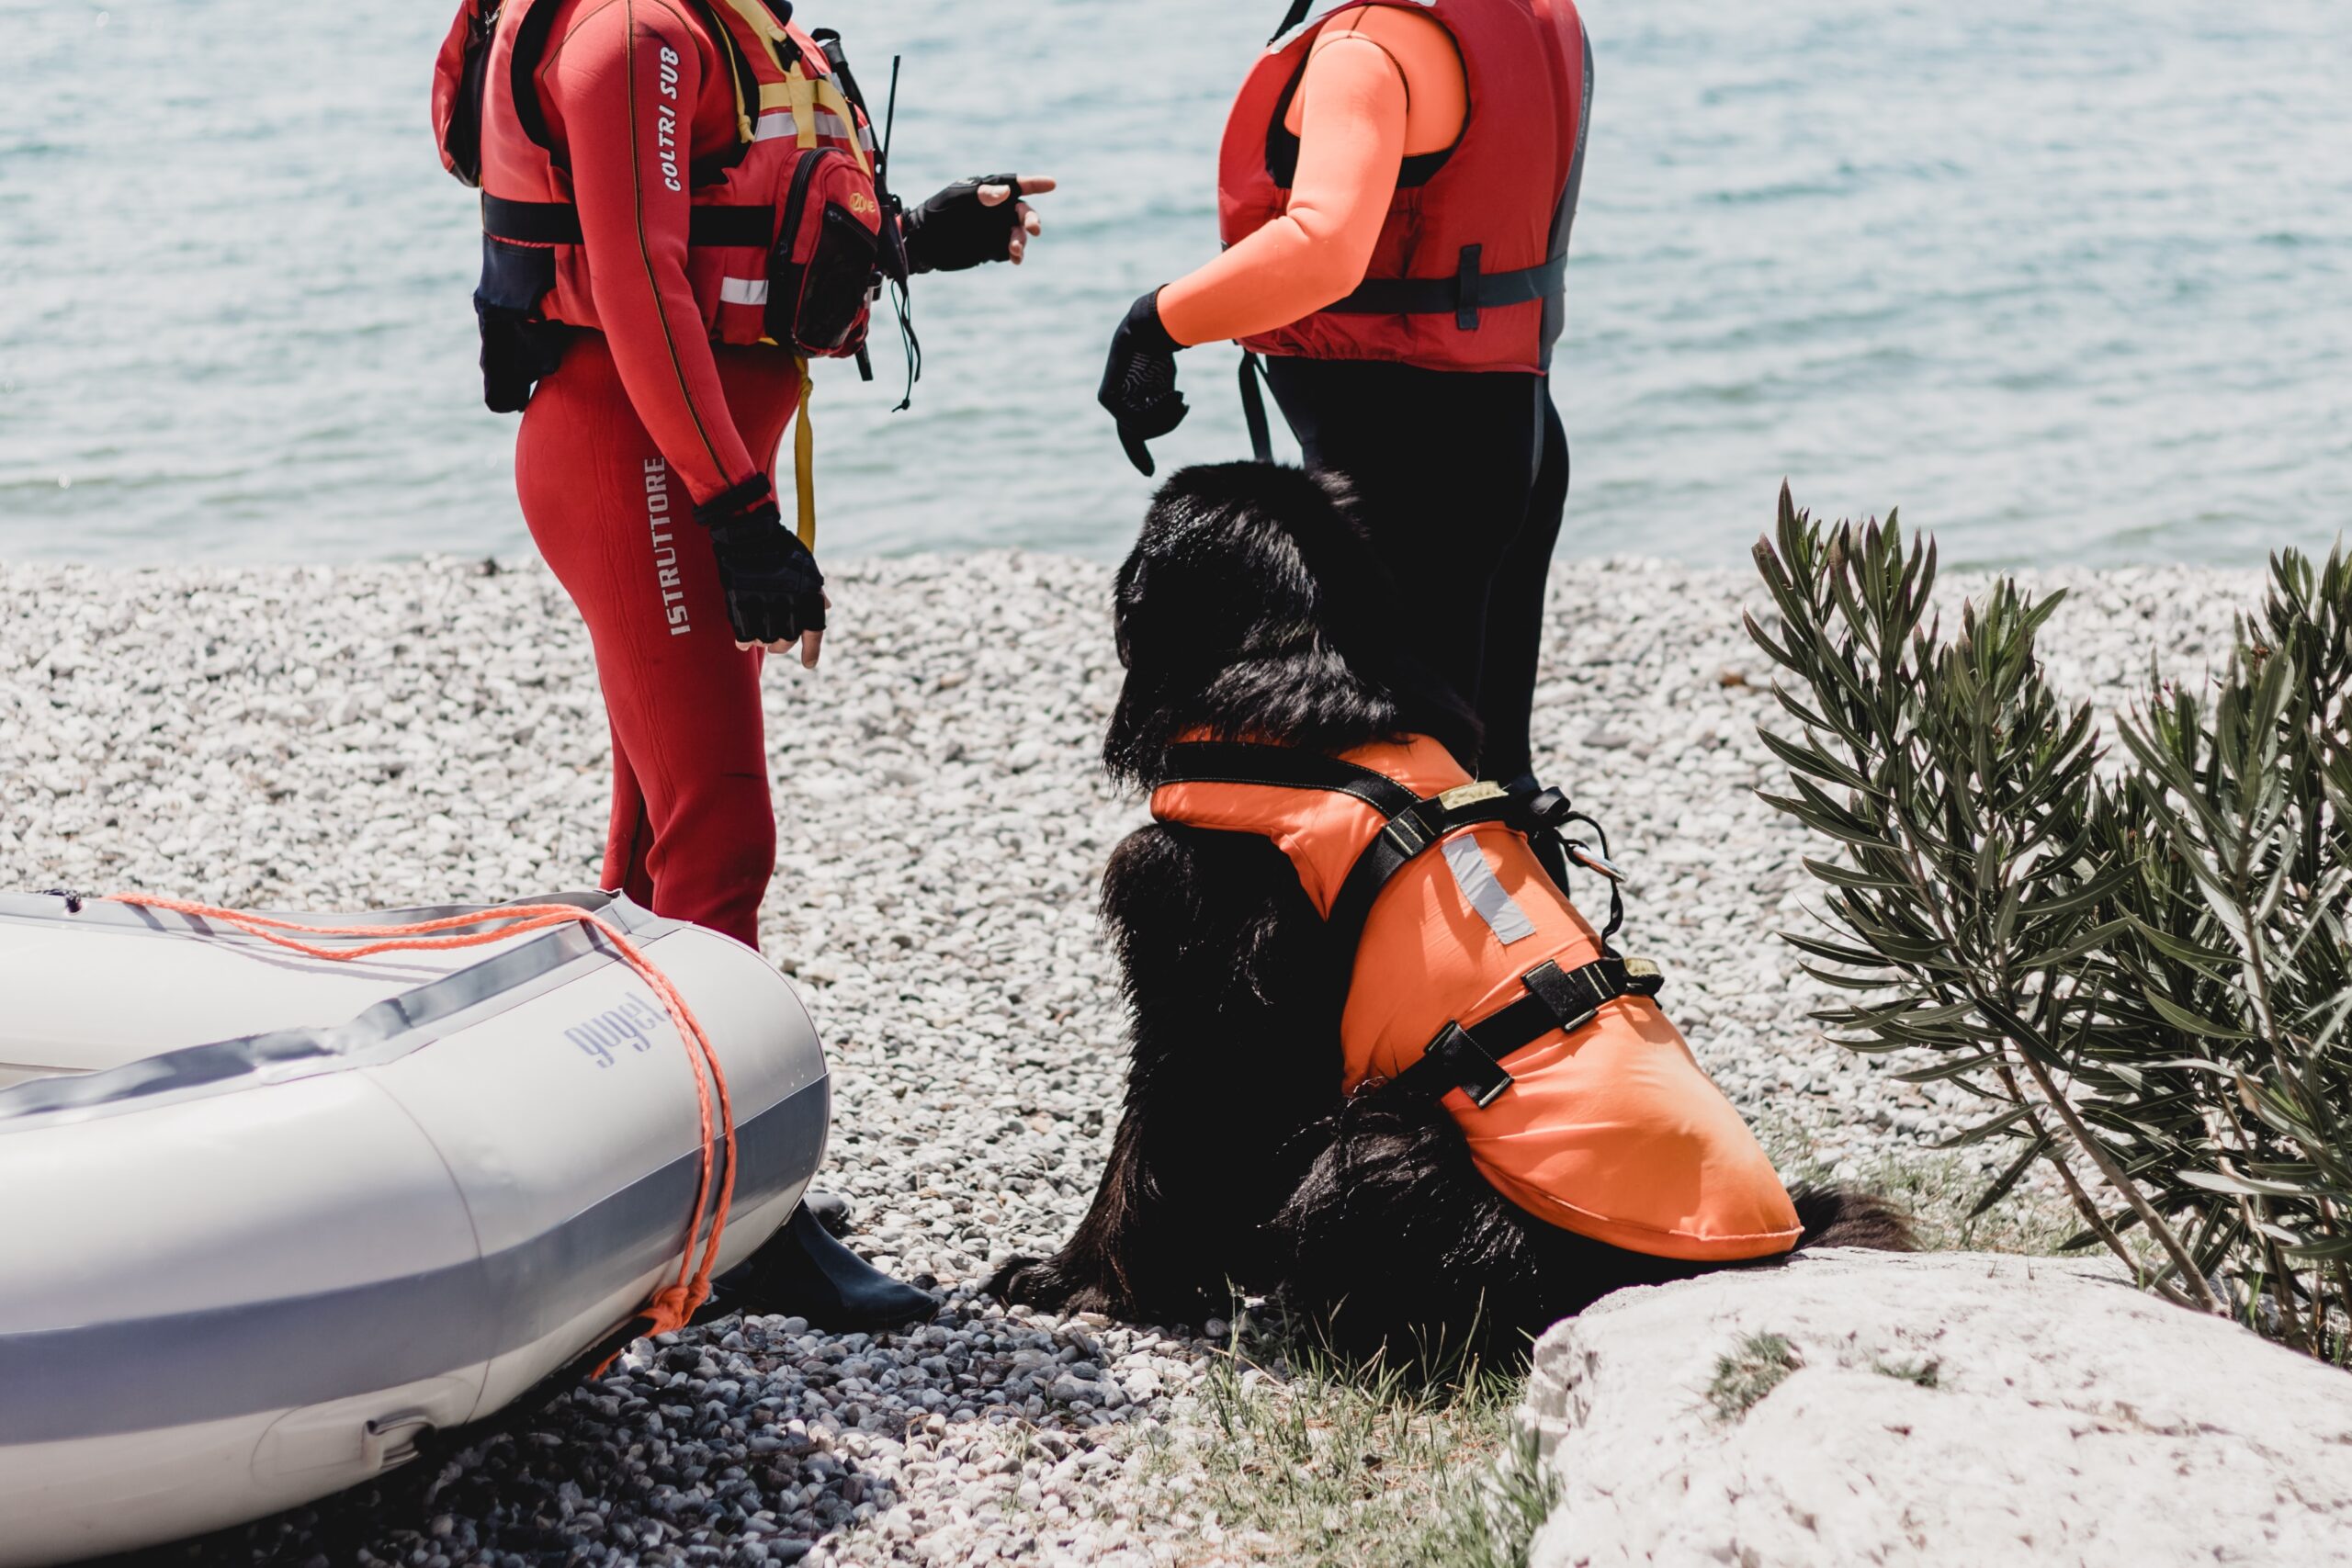 lake, rescue dog, water safety, lifeguard, water rescue, working dog, swimming, clothing, apparel, life jacket, vest, human, people images & pictures,  public domain images